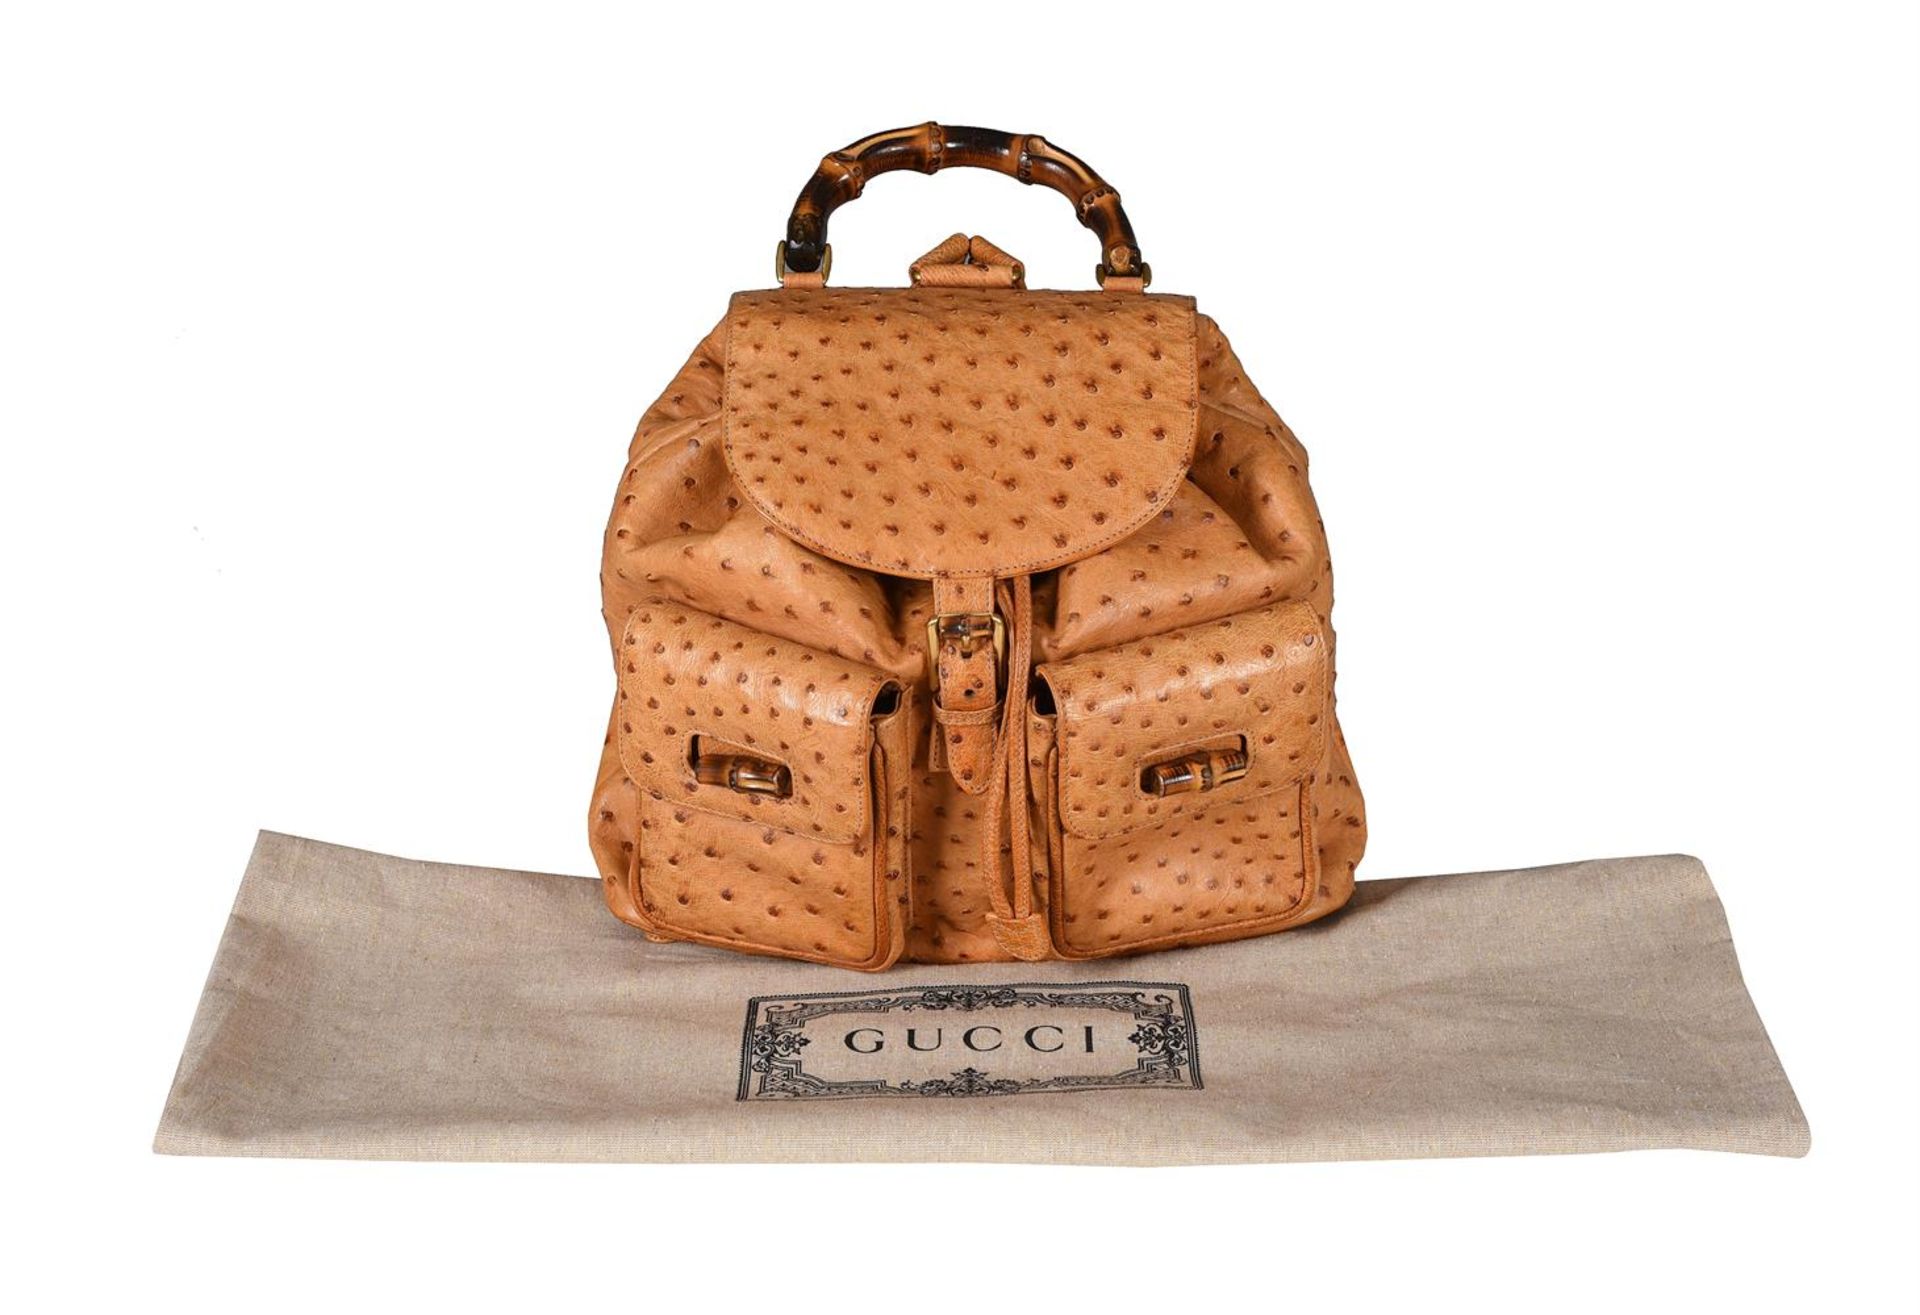 GUCCI, A TAN OSTRICH LEATHER AND BAMBOO BACKPACK - Bild 4 aus 4